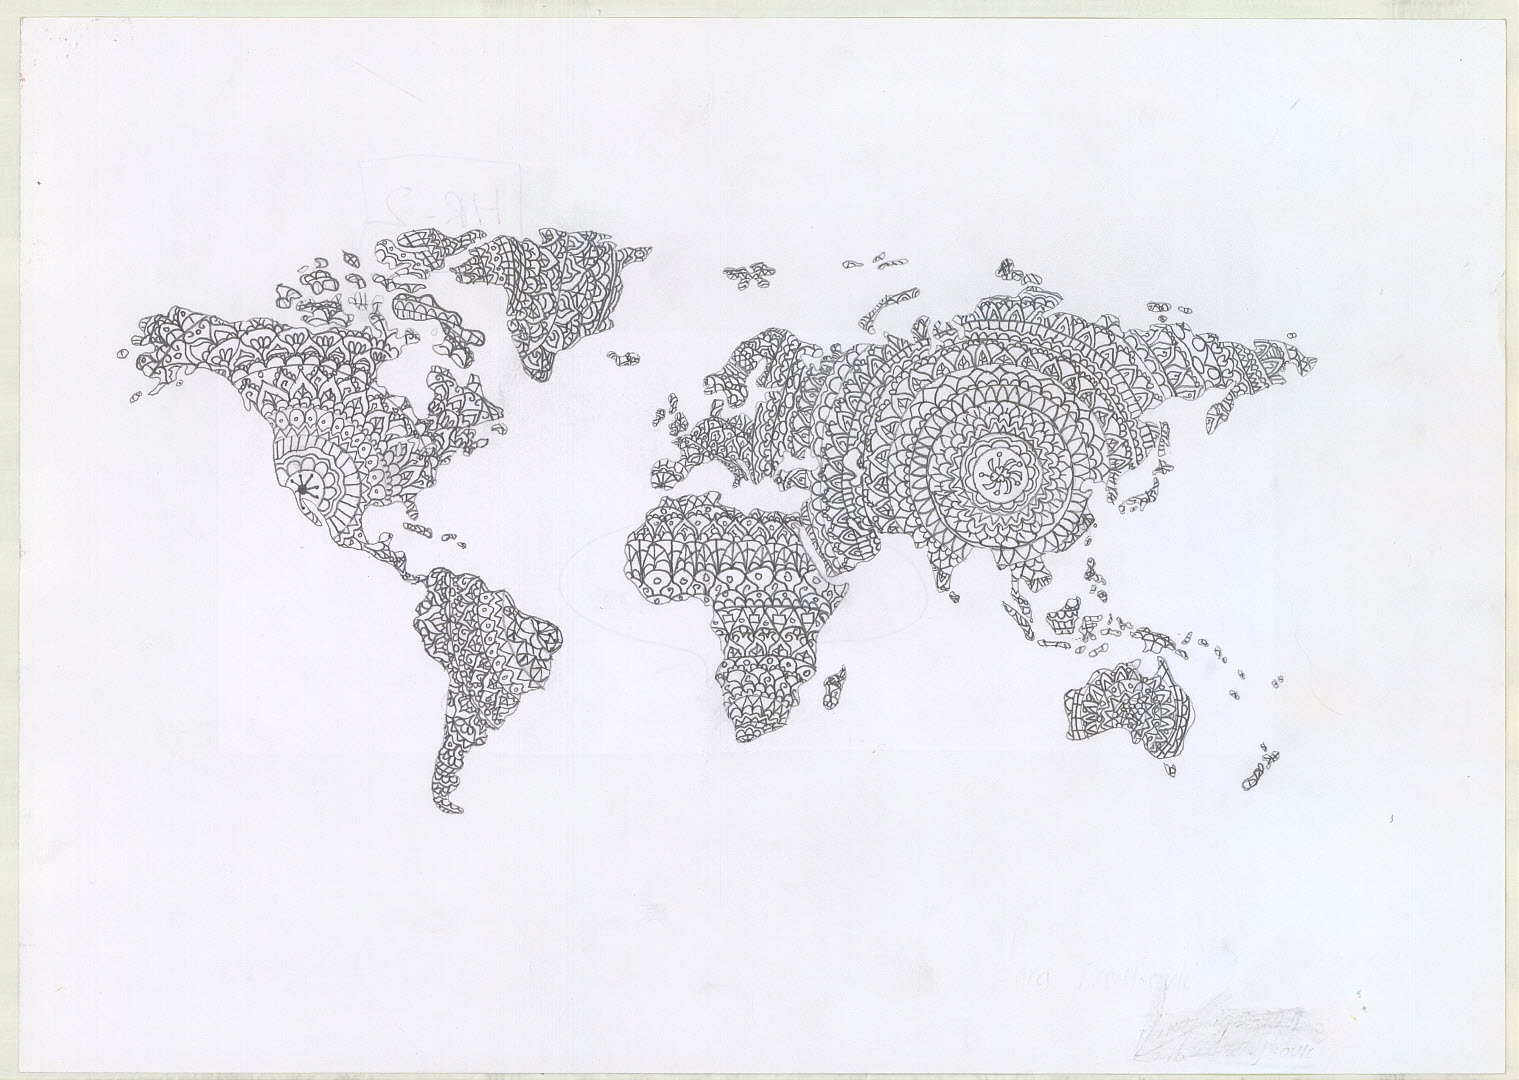 Shows the continents in black and white